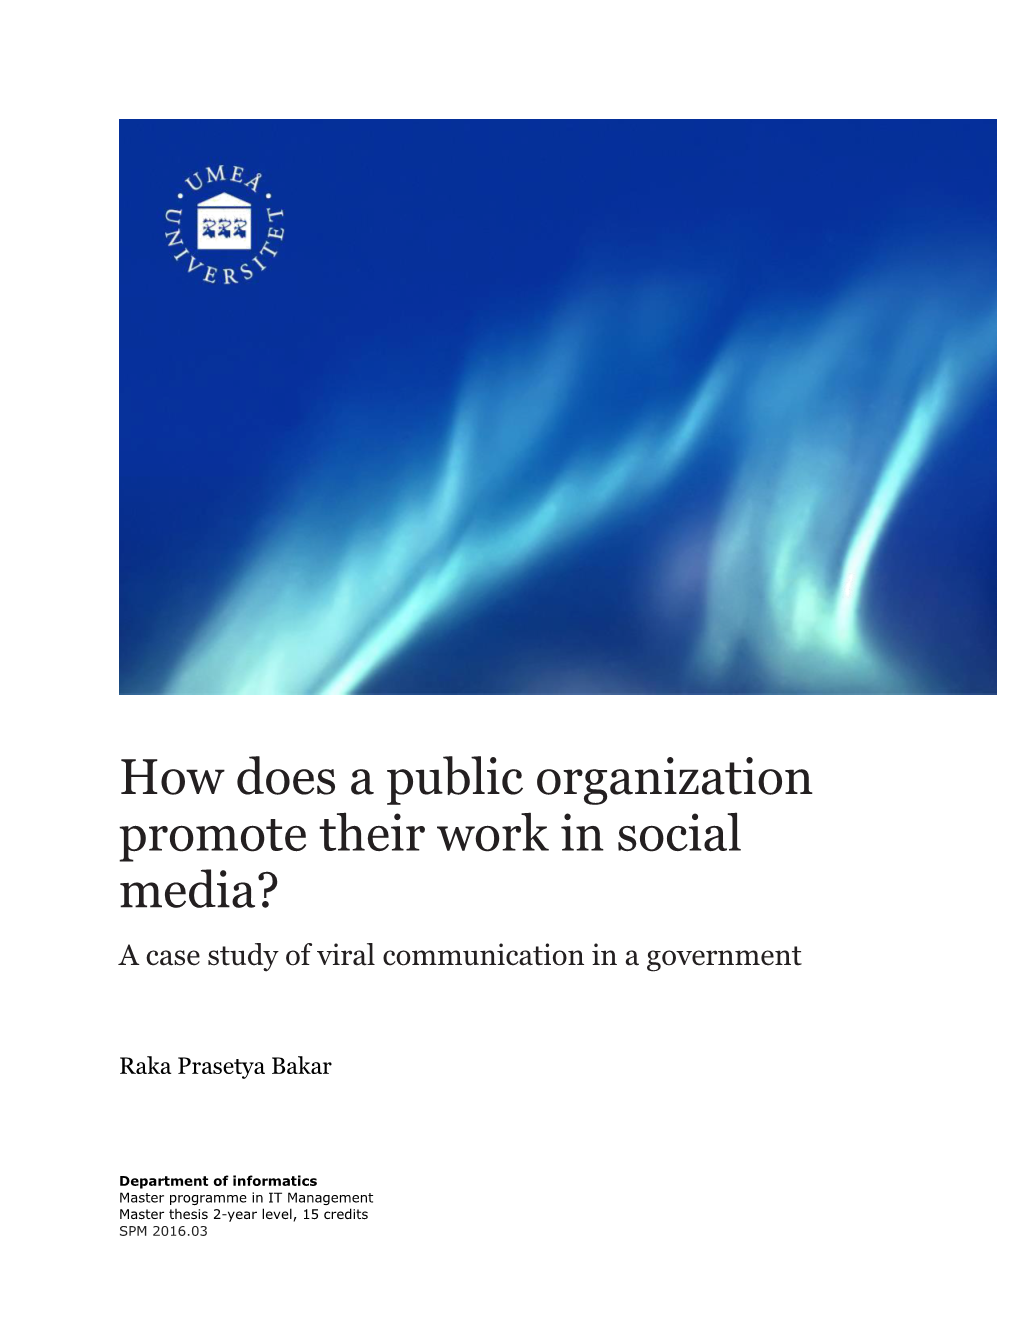 How Does a Public Organization Promote Their Work in Social Media?